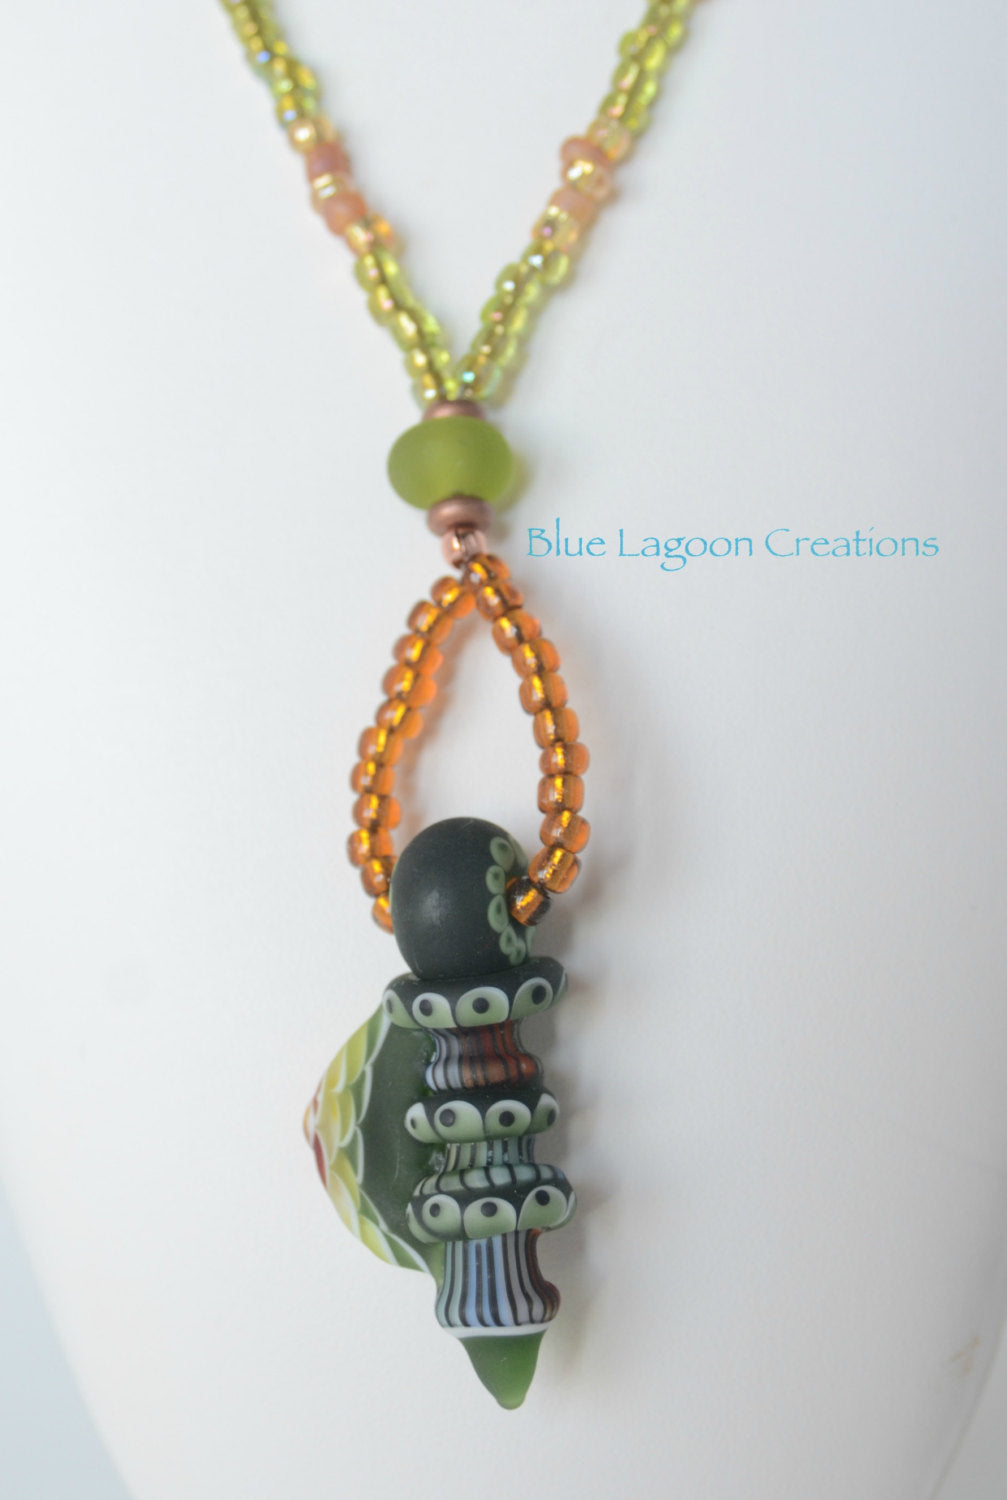 Green, Amber and Copper Lampwork Pendant Necklace with Bead by Anastasia